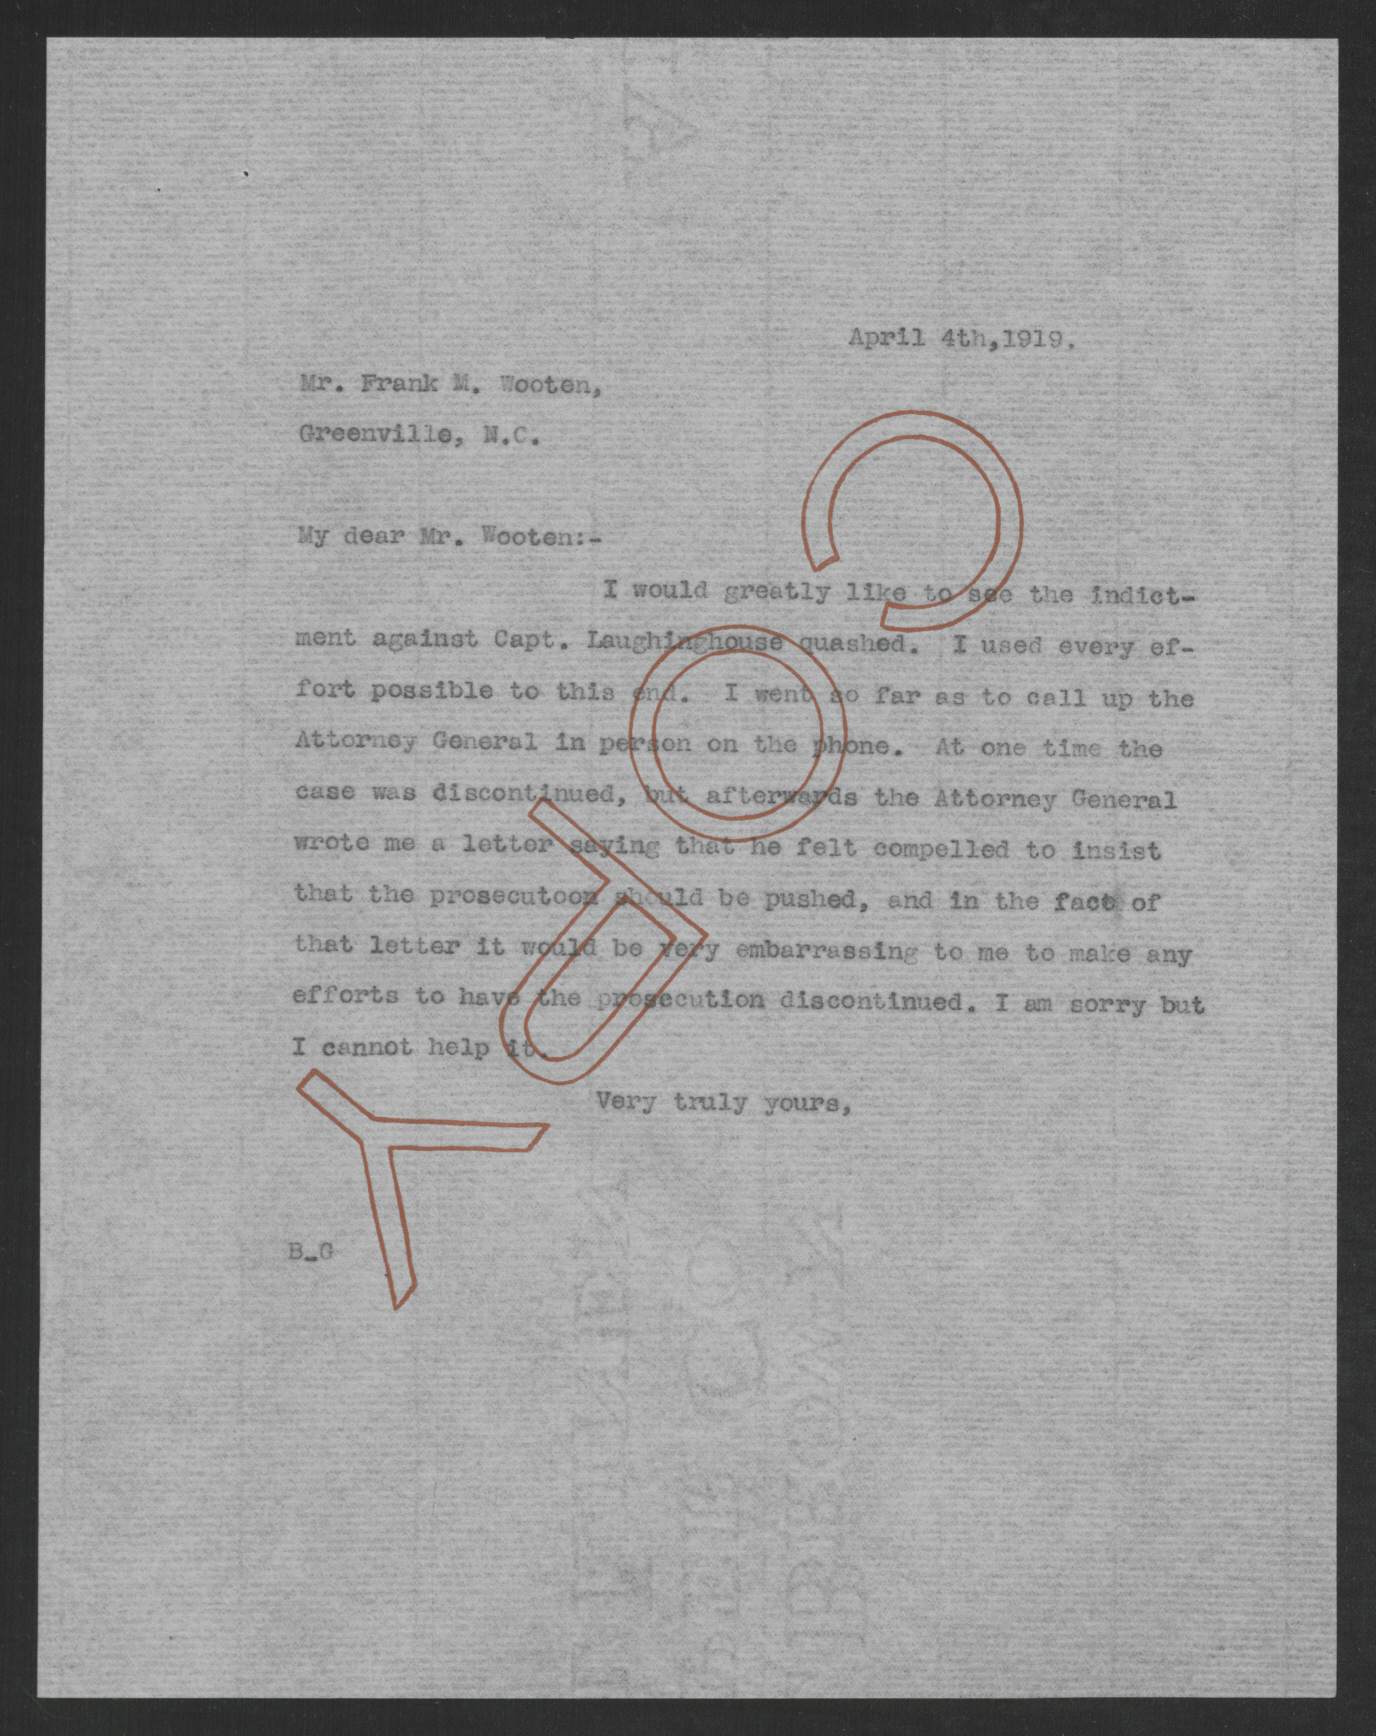 Letter from Thomas W. Bickett to Frank M. Wooten, April 4, 1919